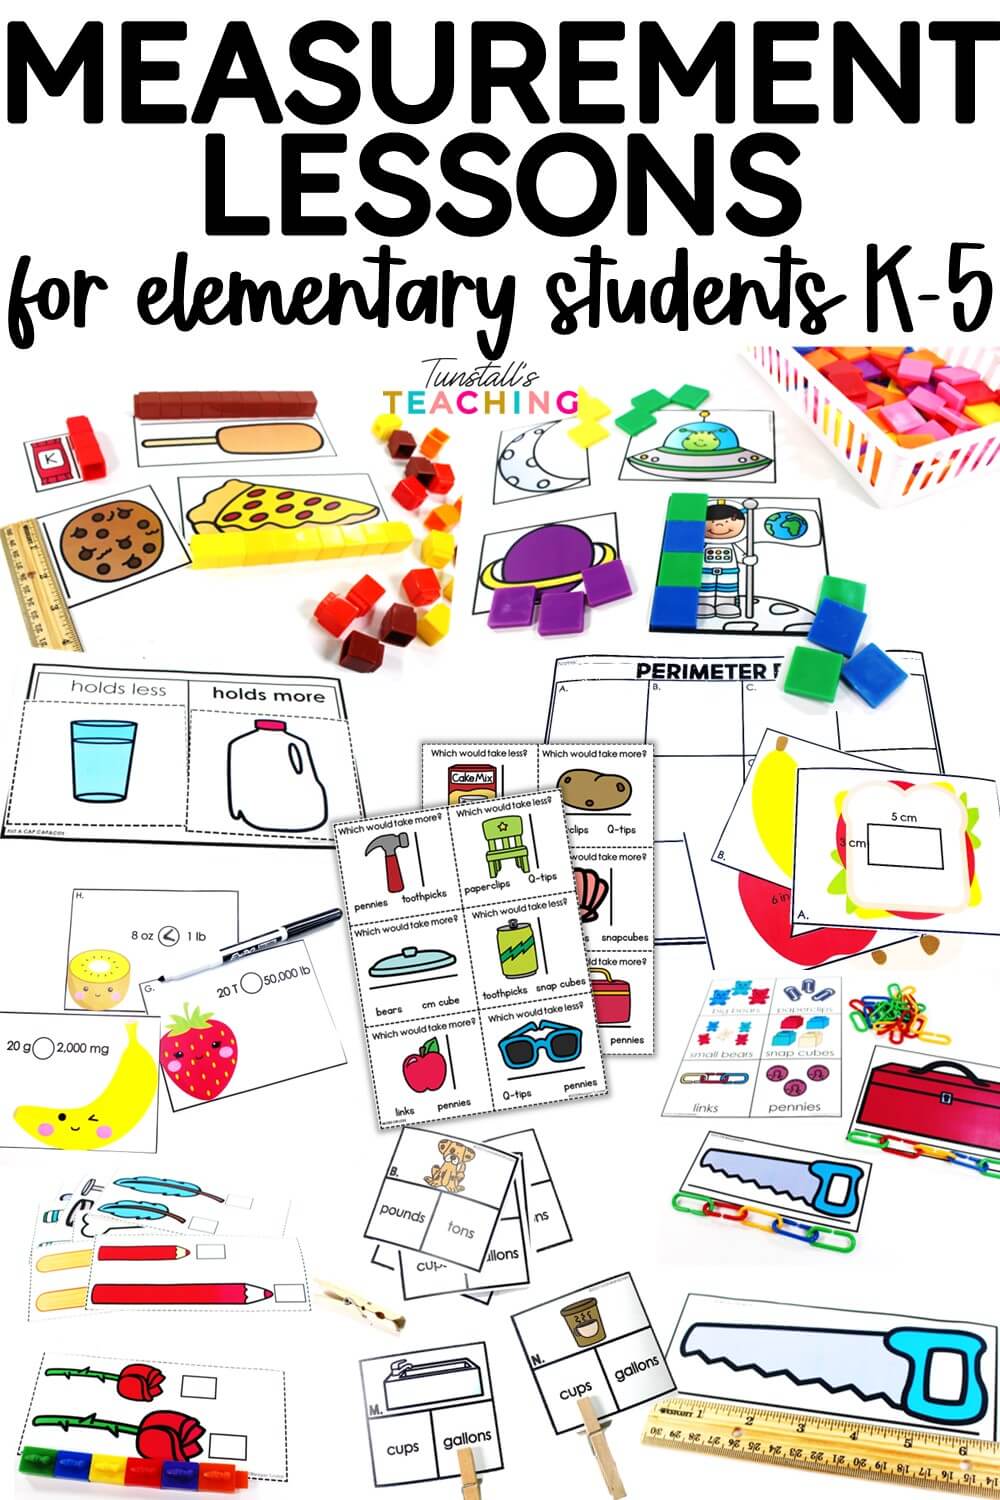 Collage of measurement lesson ideas for elementary students K-5